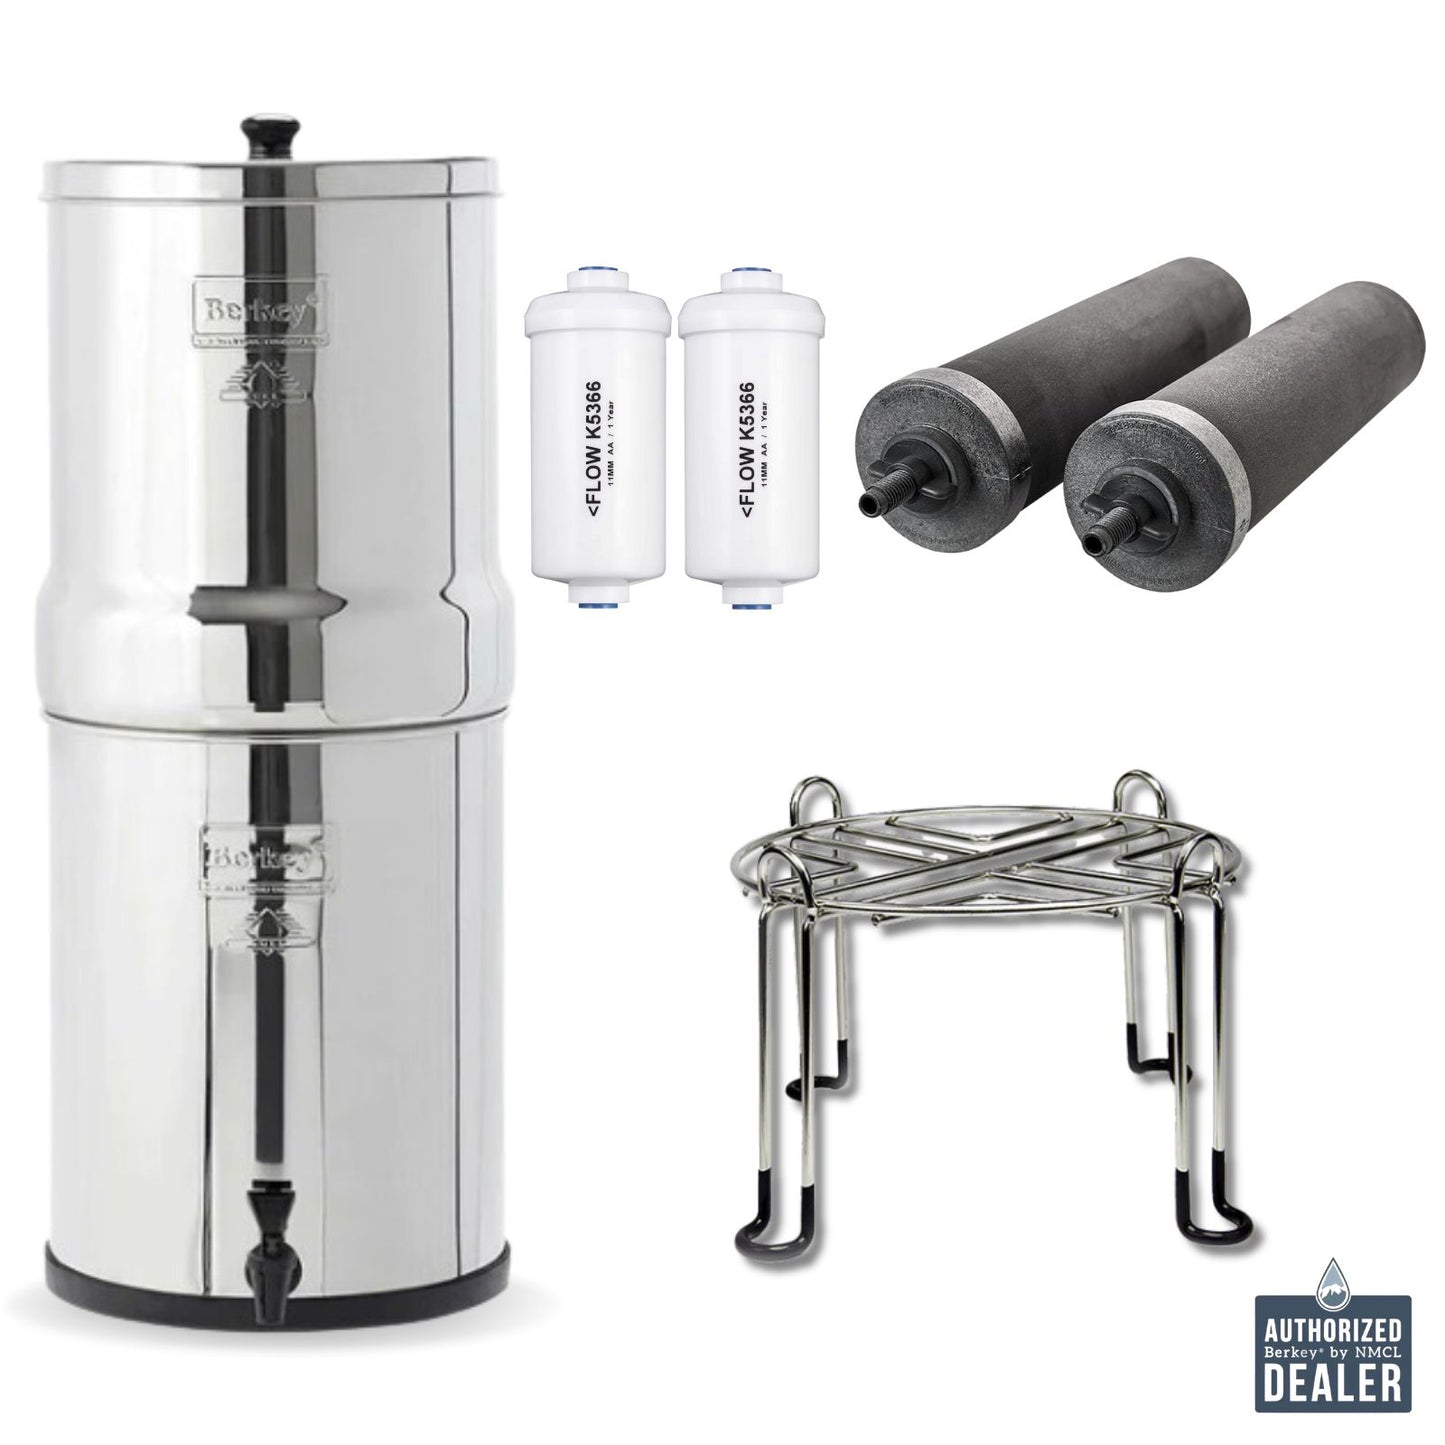 Royal Berkey with Black Berkey Elements, PF2 Fluoride Filters and Stainless Stand- Bundle